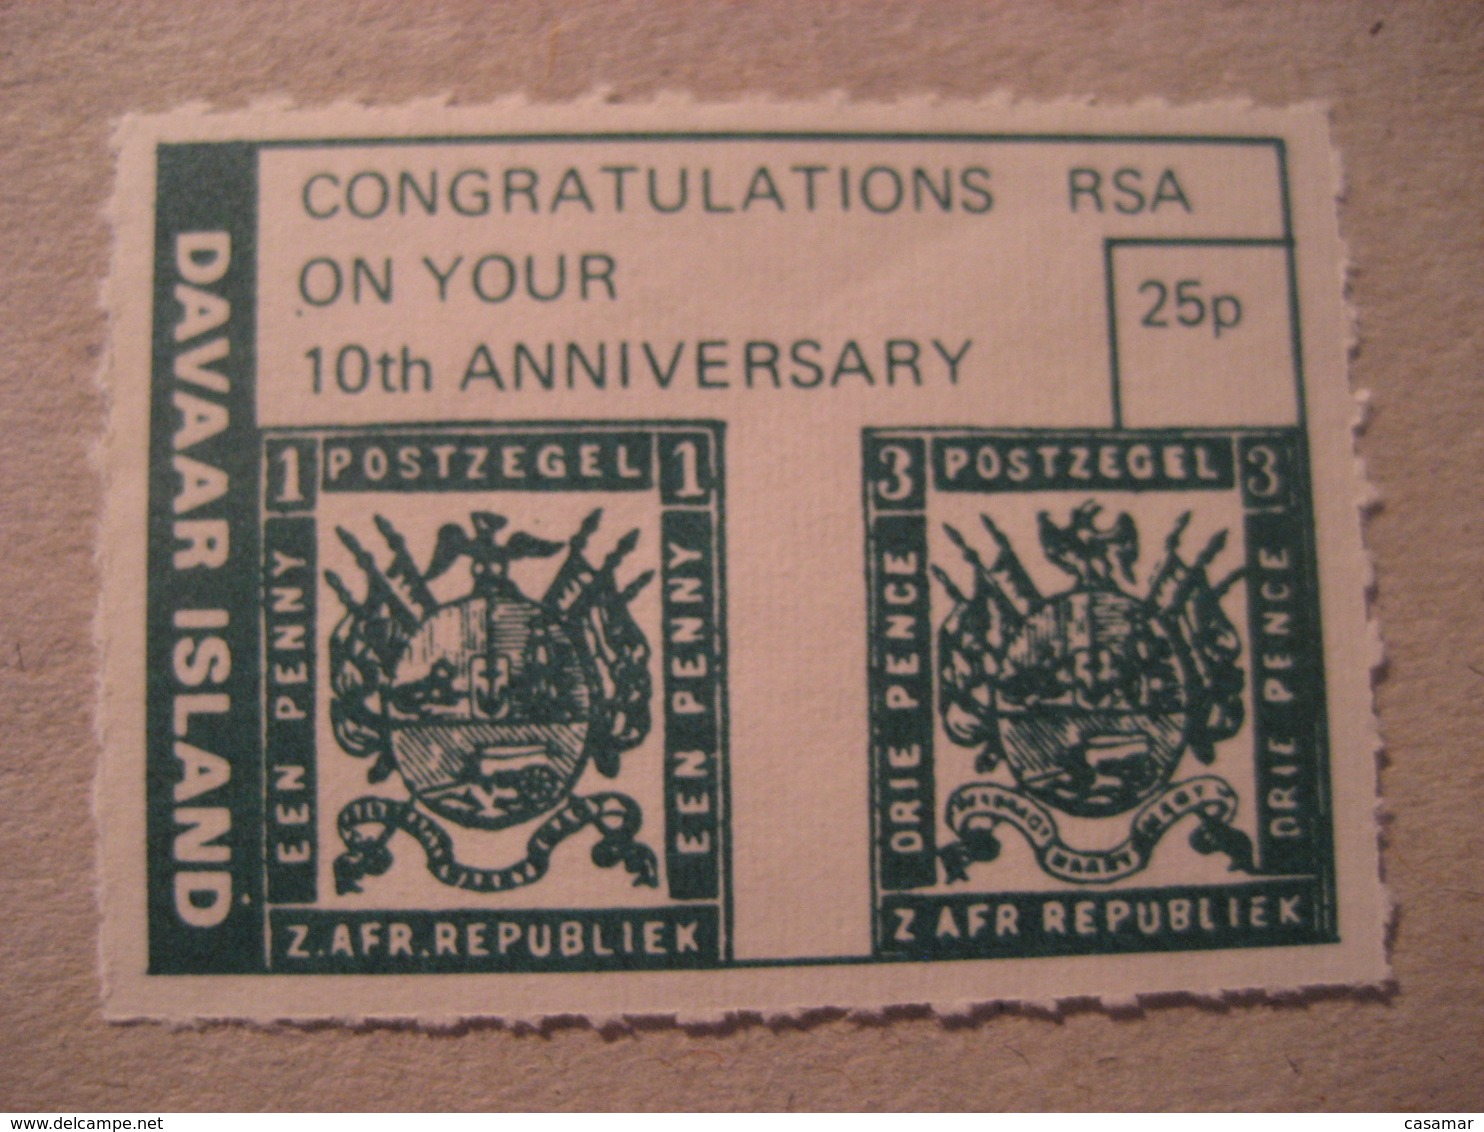 DAVAAR Island RSA South Africa 10th Anniversary LOCAL Stamp On Stamp UK GB - Local Issues